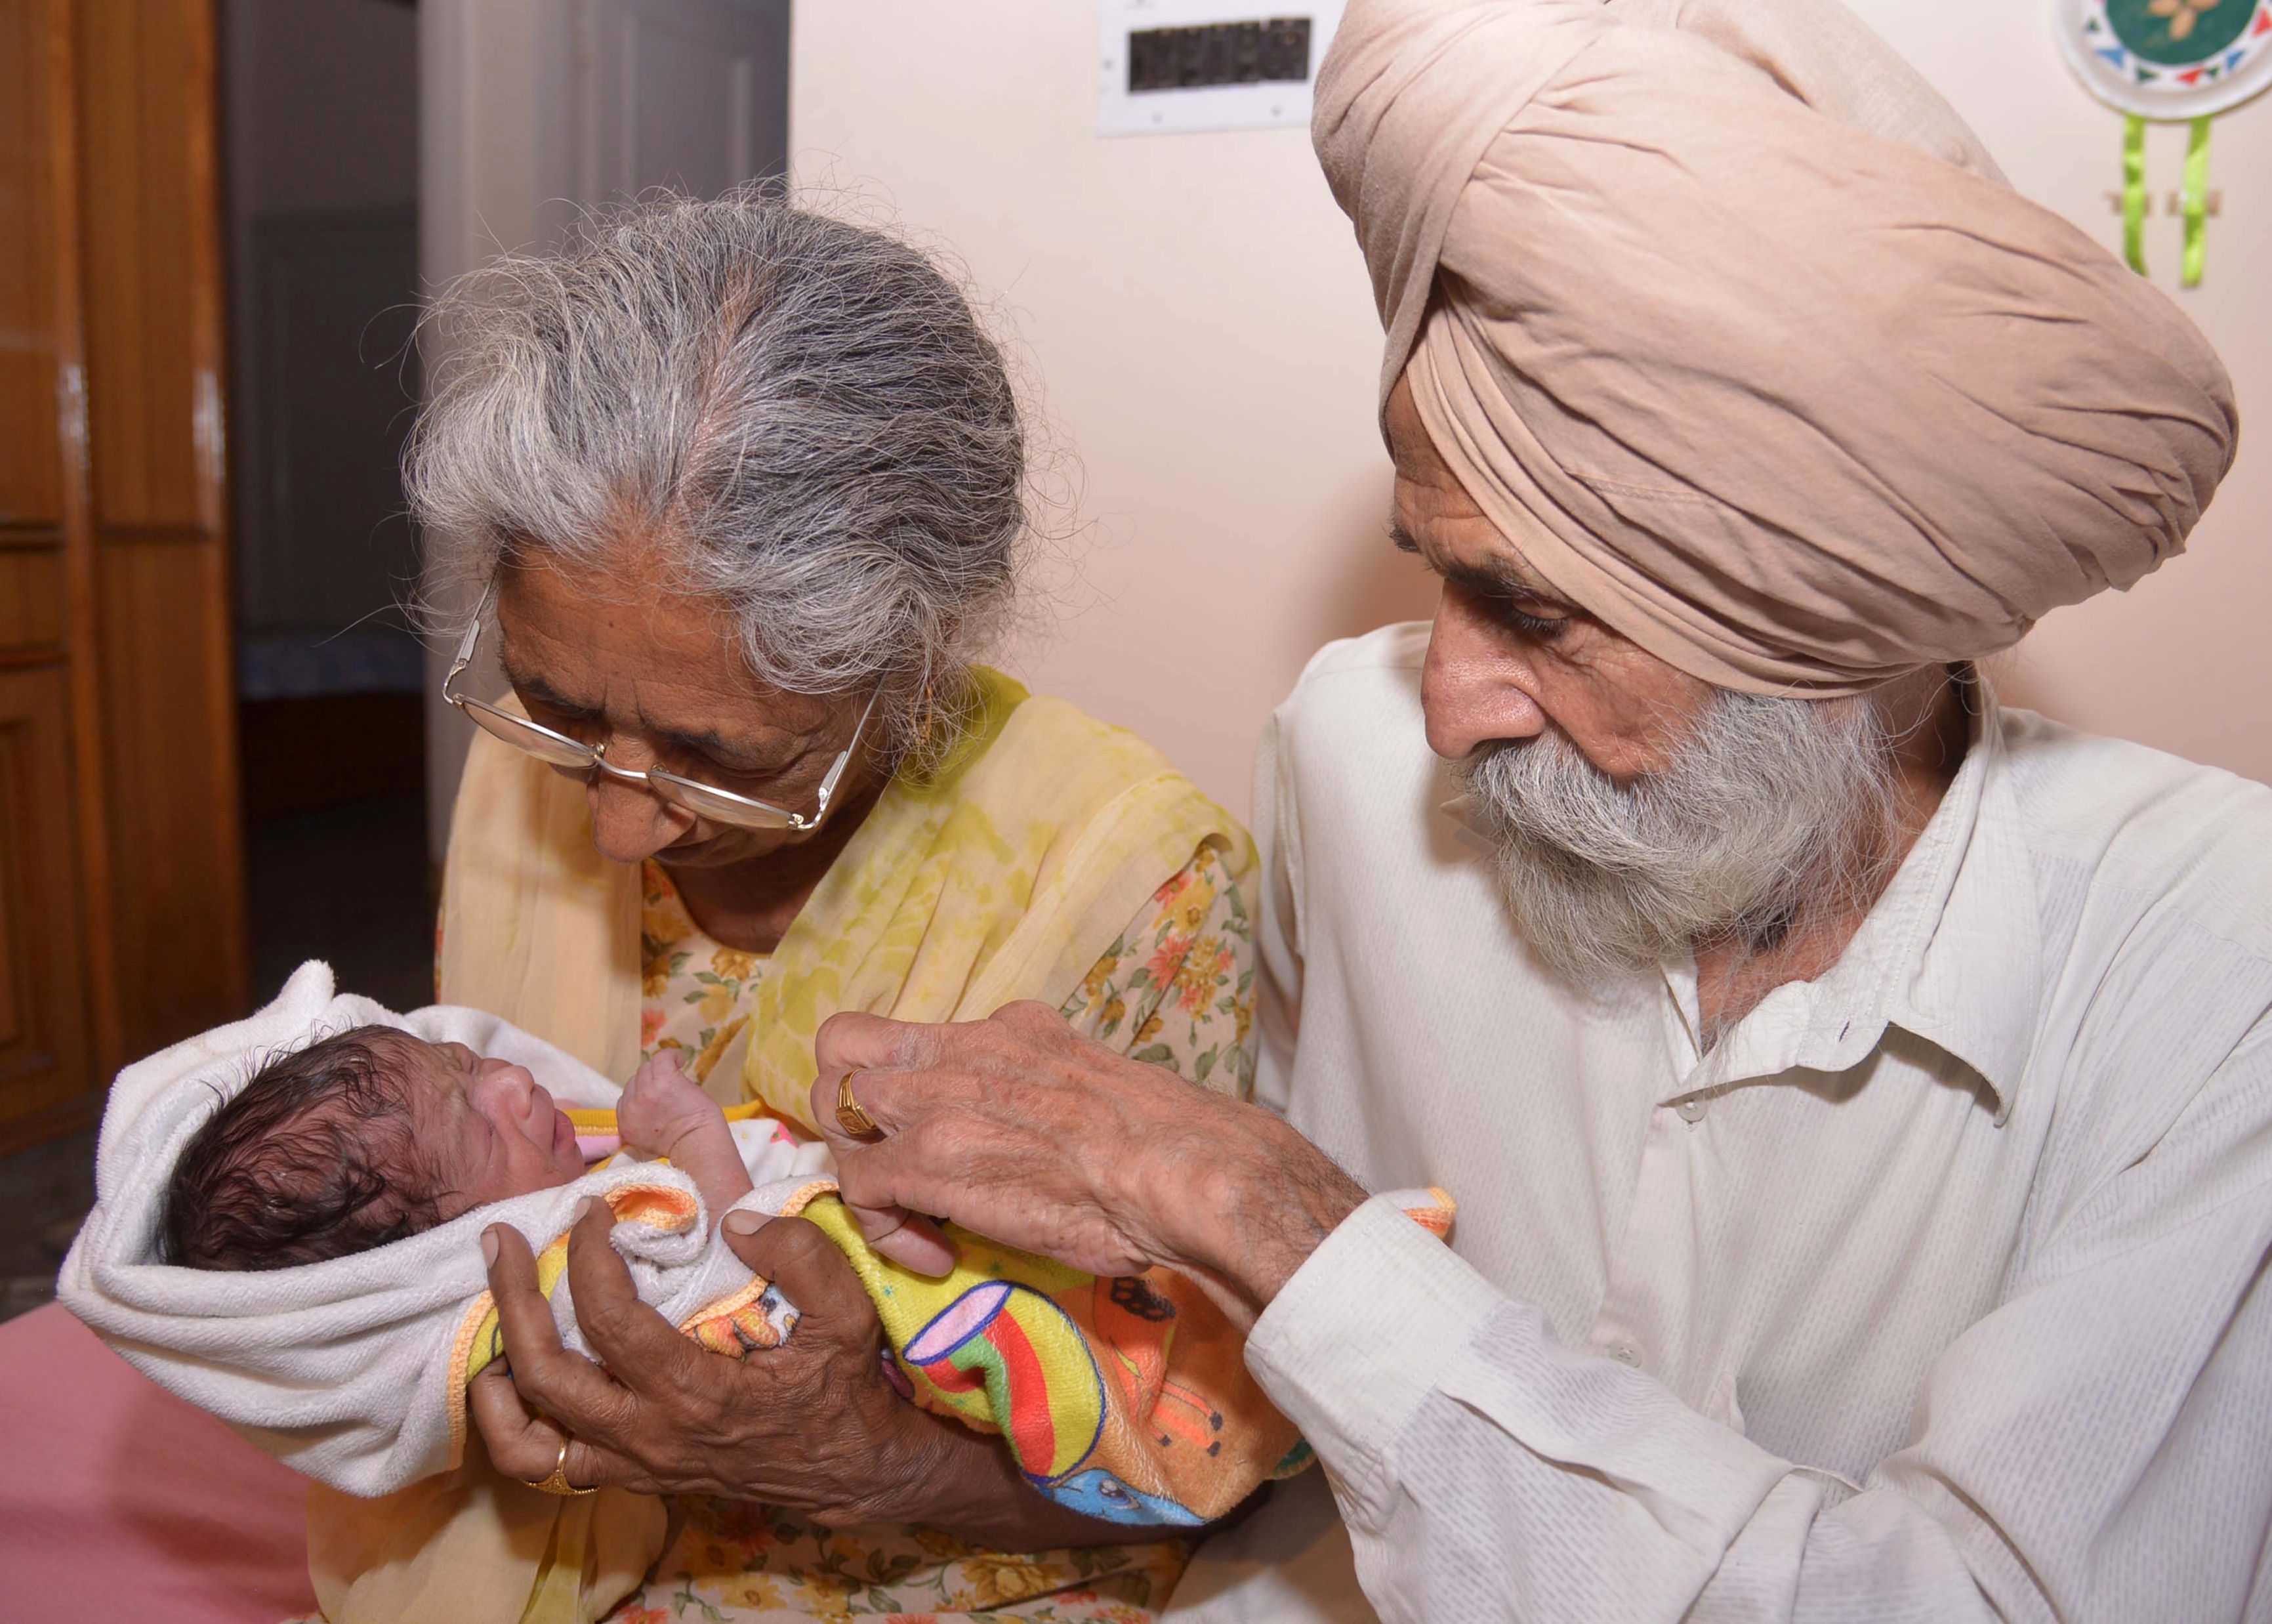 Pregnant Delivery Girl - Woman in her 70s may be oldest ever to give birth - CBS News